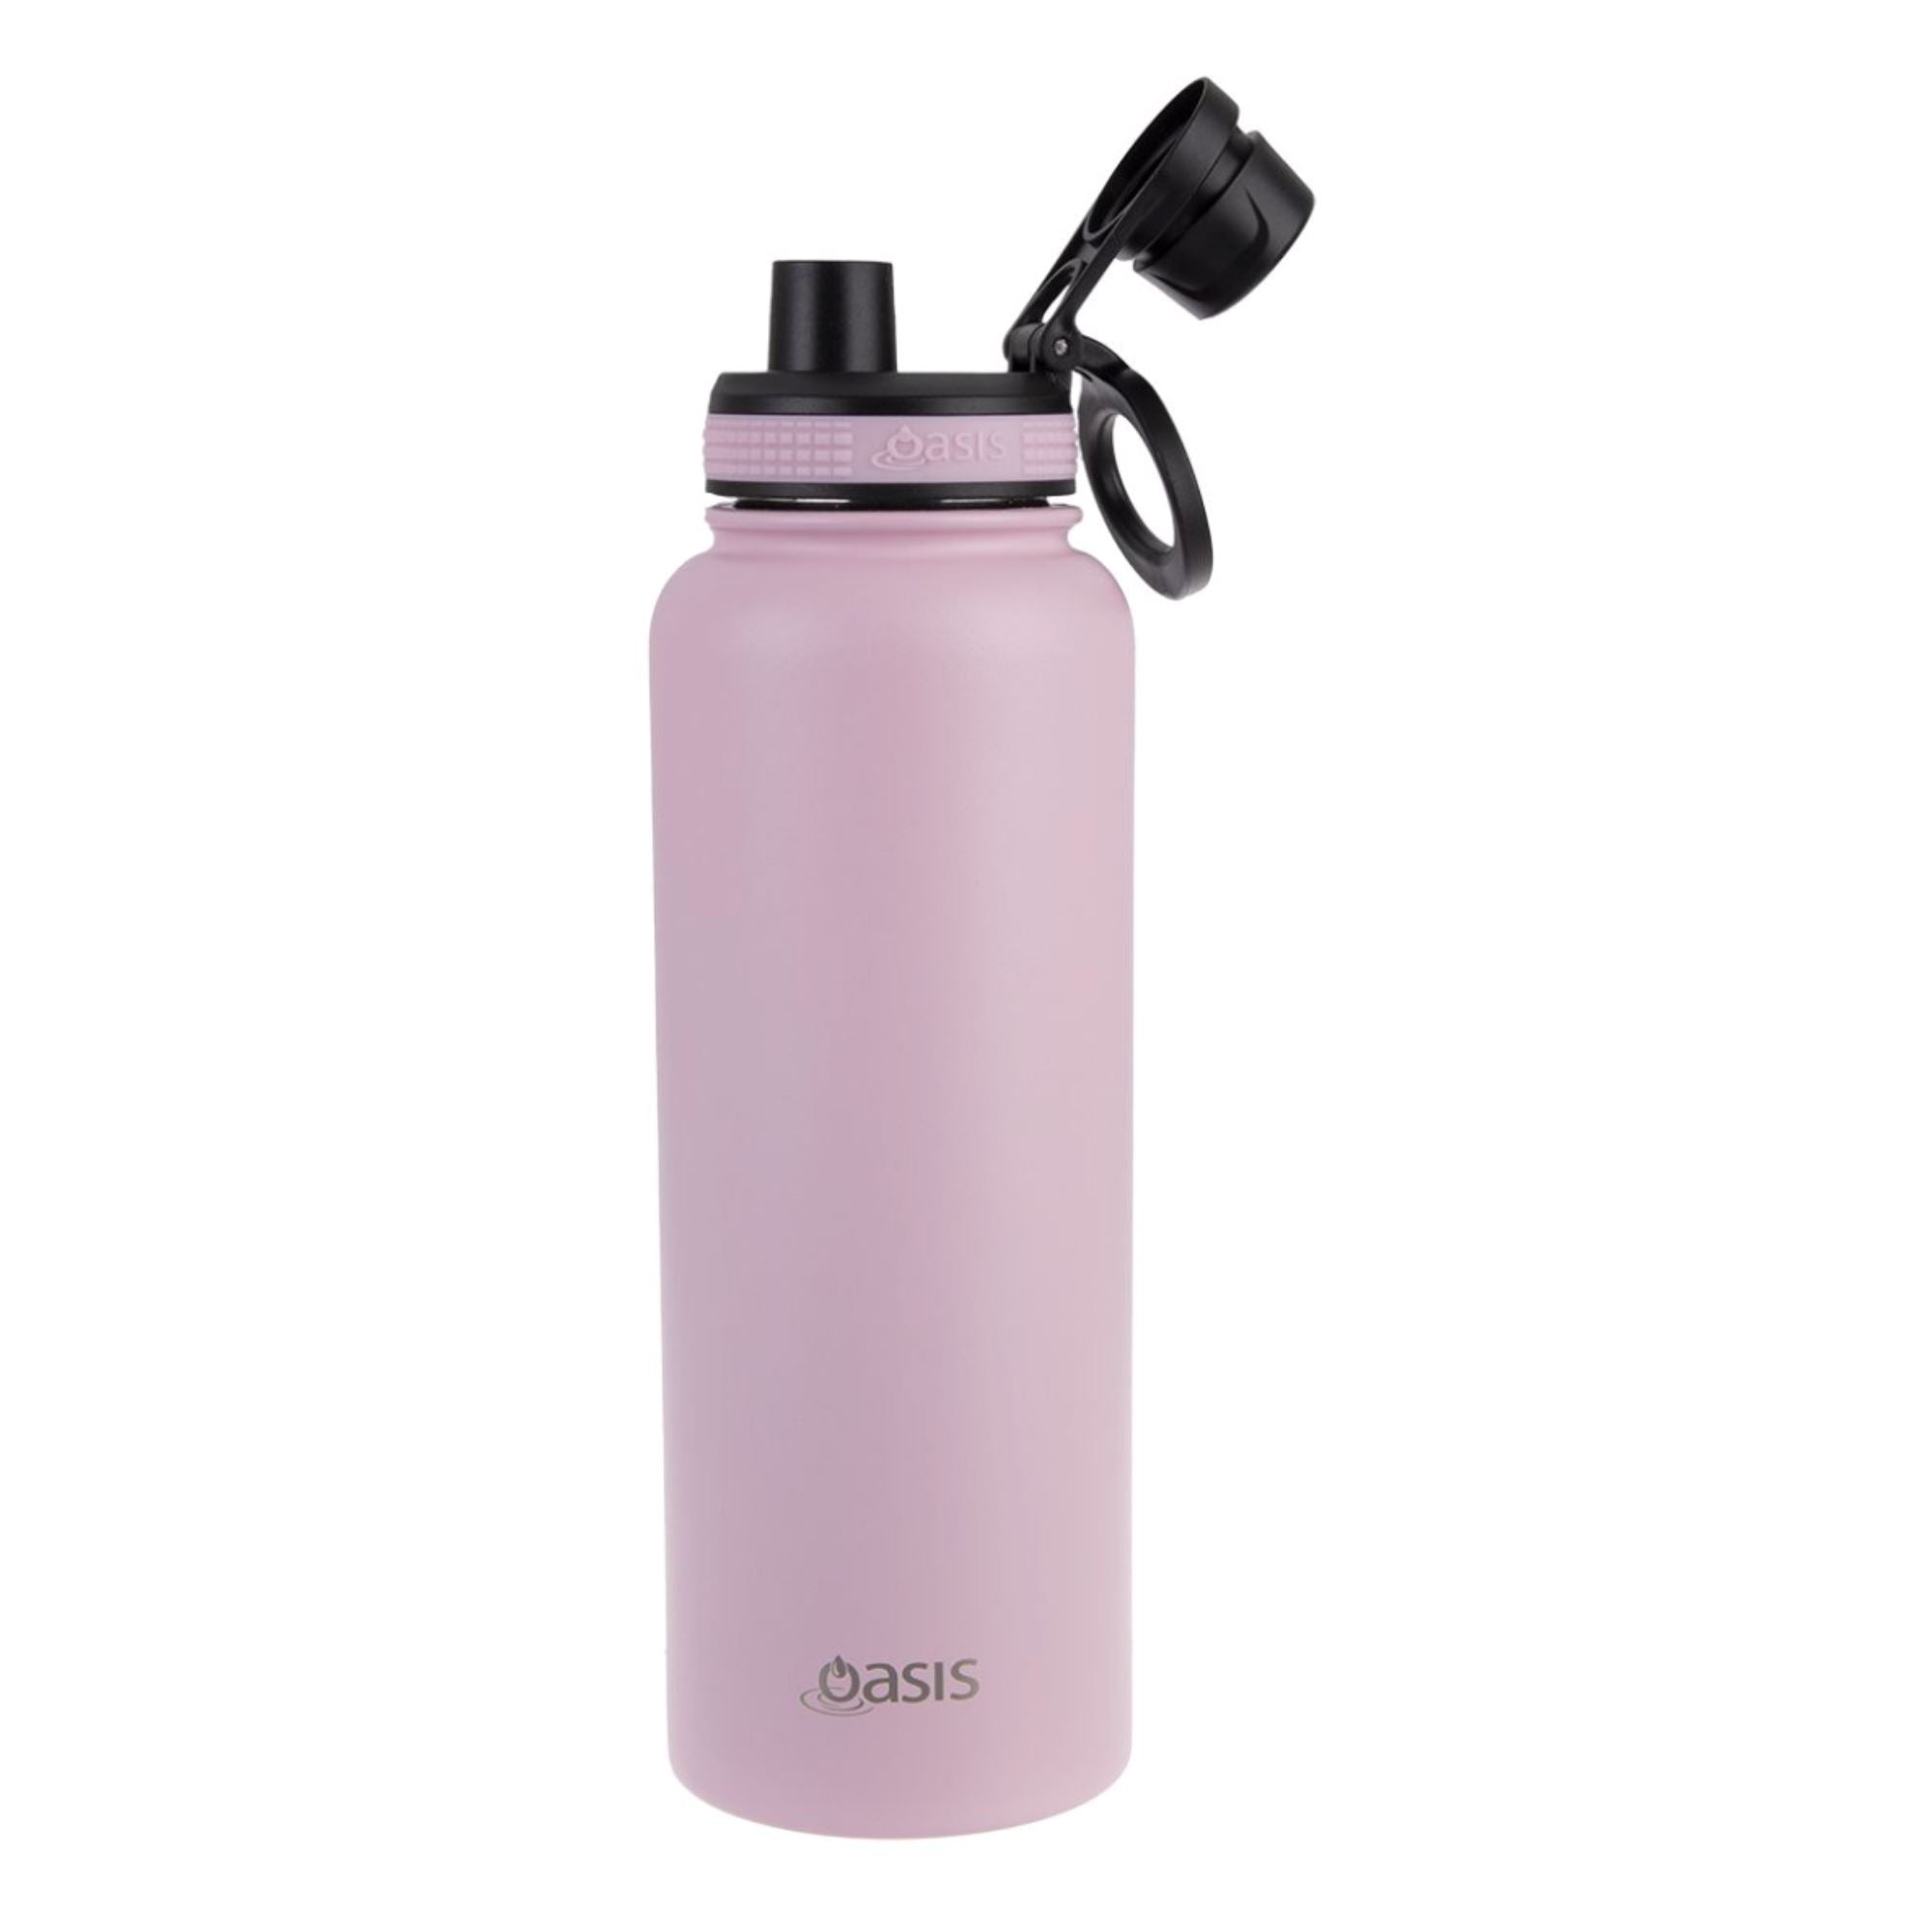 Oasis Insulated Challenger Water Bottle 1.1 Litre - Carnation Water Bottles Oasis 